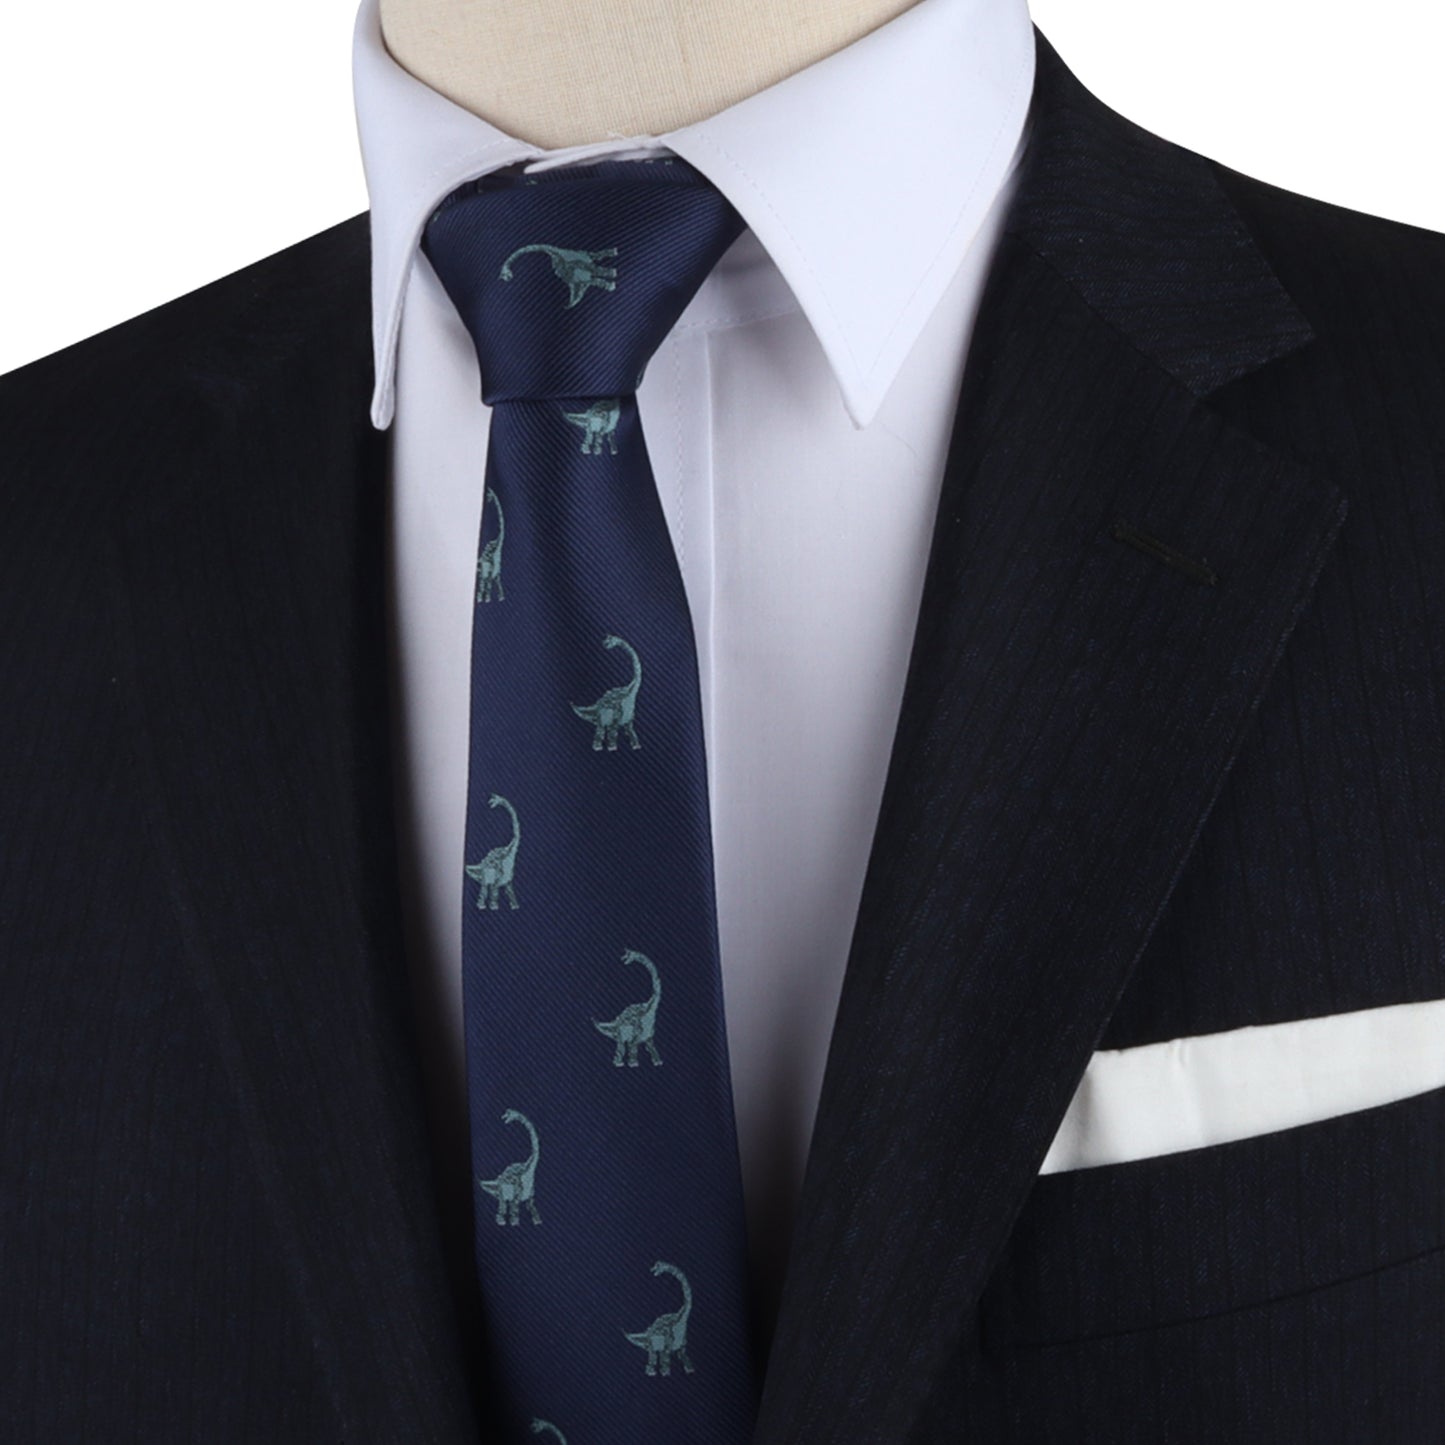 A mannequin dressed in a suit with a Brontosaurus Skinny Tie and pocket square, exuding elegance.